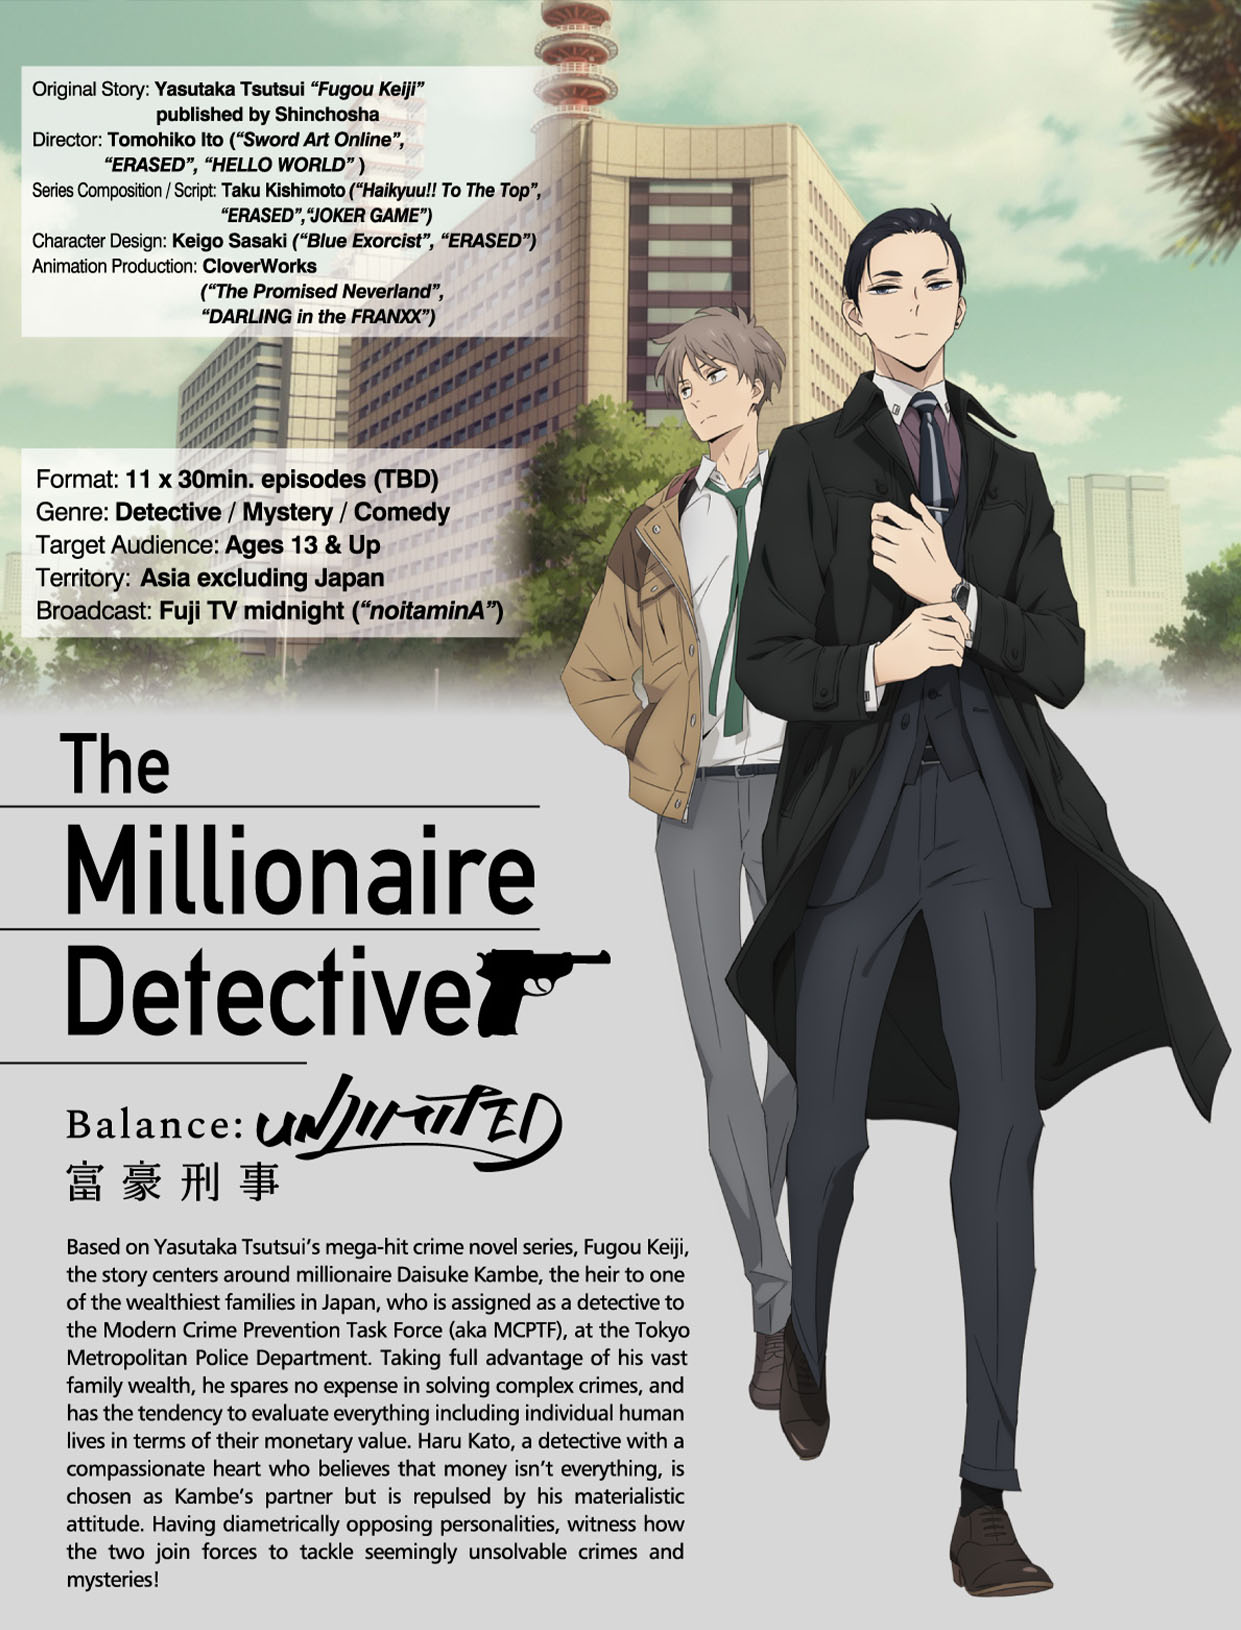 The Millionaire Detective  Balance UNLIMITED Trailer  YouTube